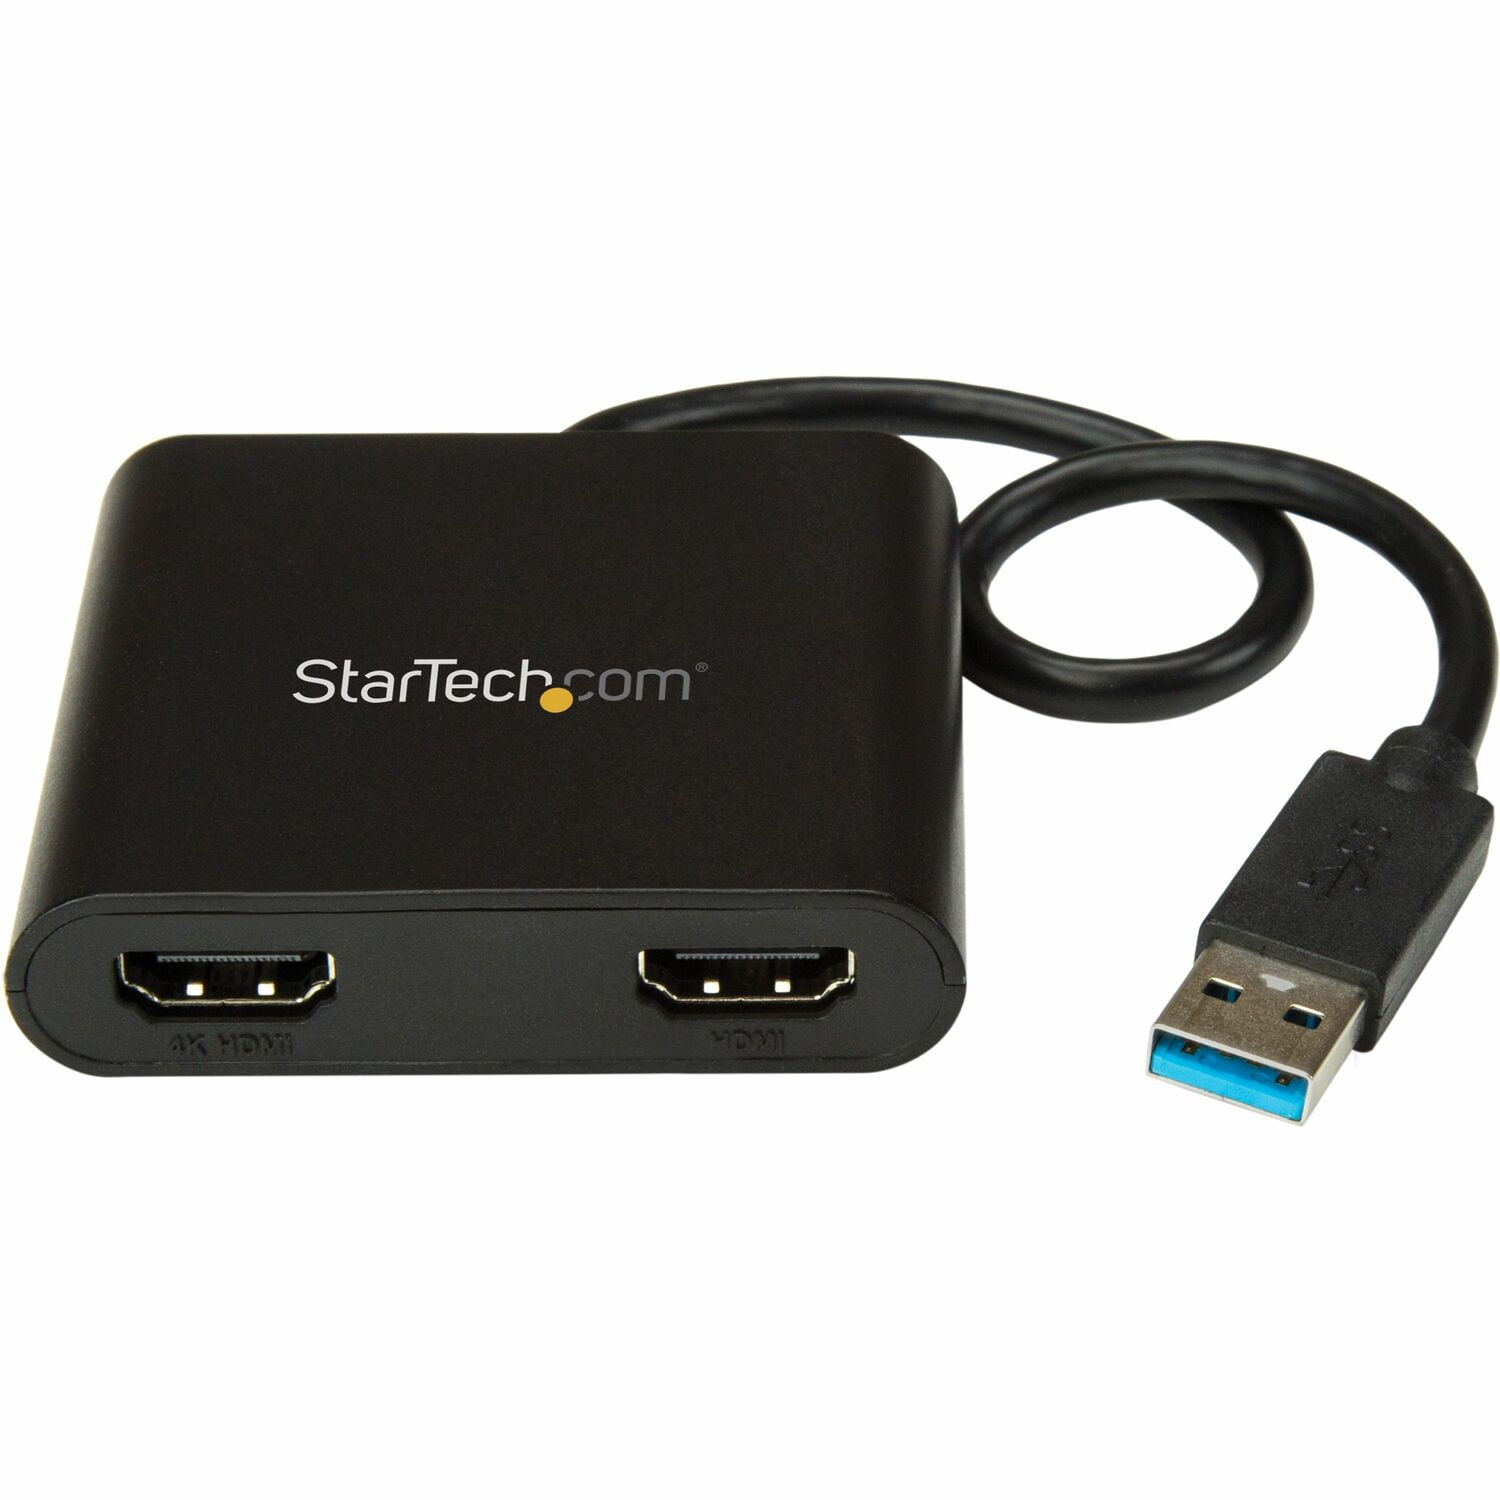 USB 3.0 to HDMI Adapter - 4K 30Hz Video - USB-A Display Adapters, Display  & Video Adapters